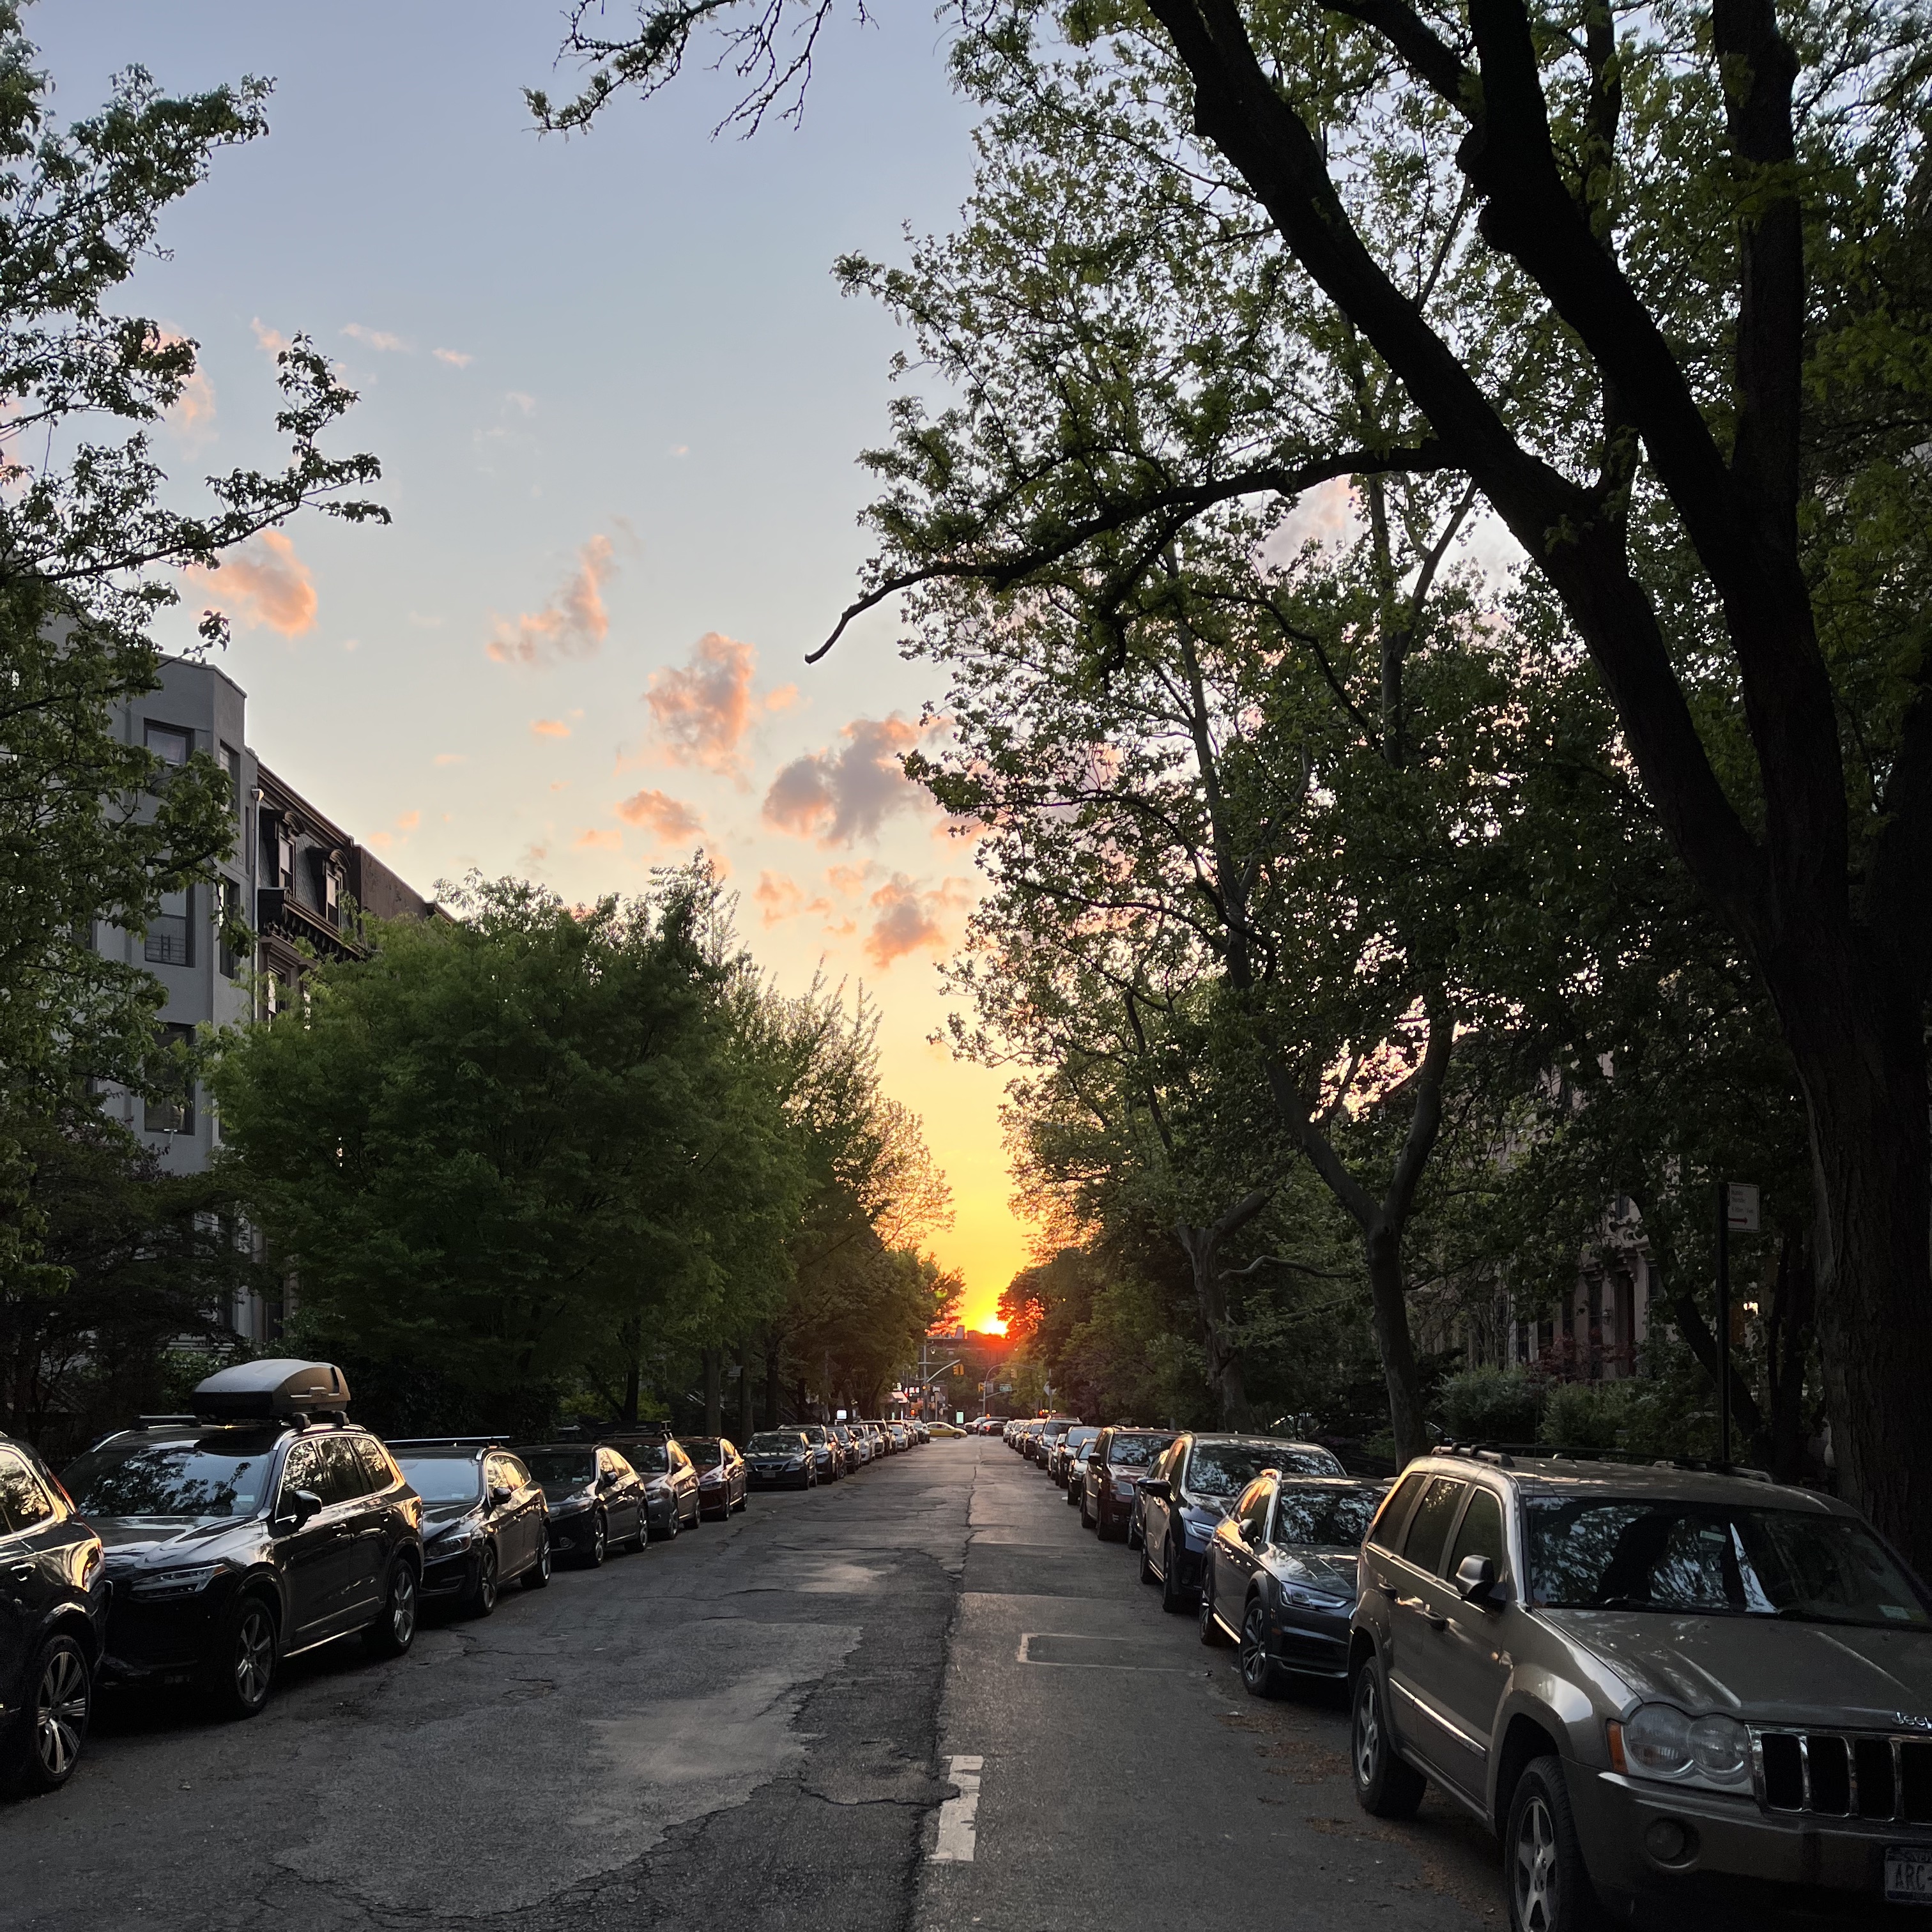 Sunset on Park Place between Vanderbilt and Carlton in Brooklyn.